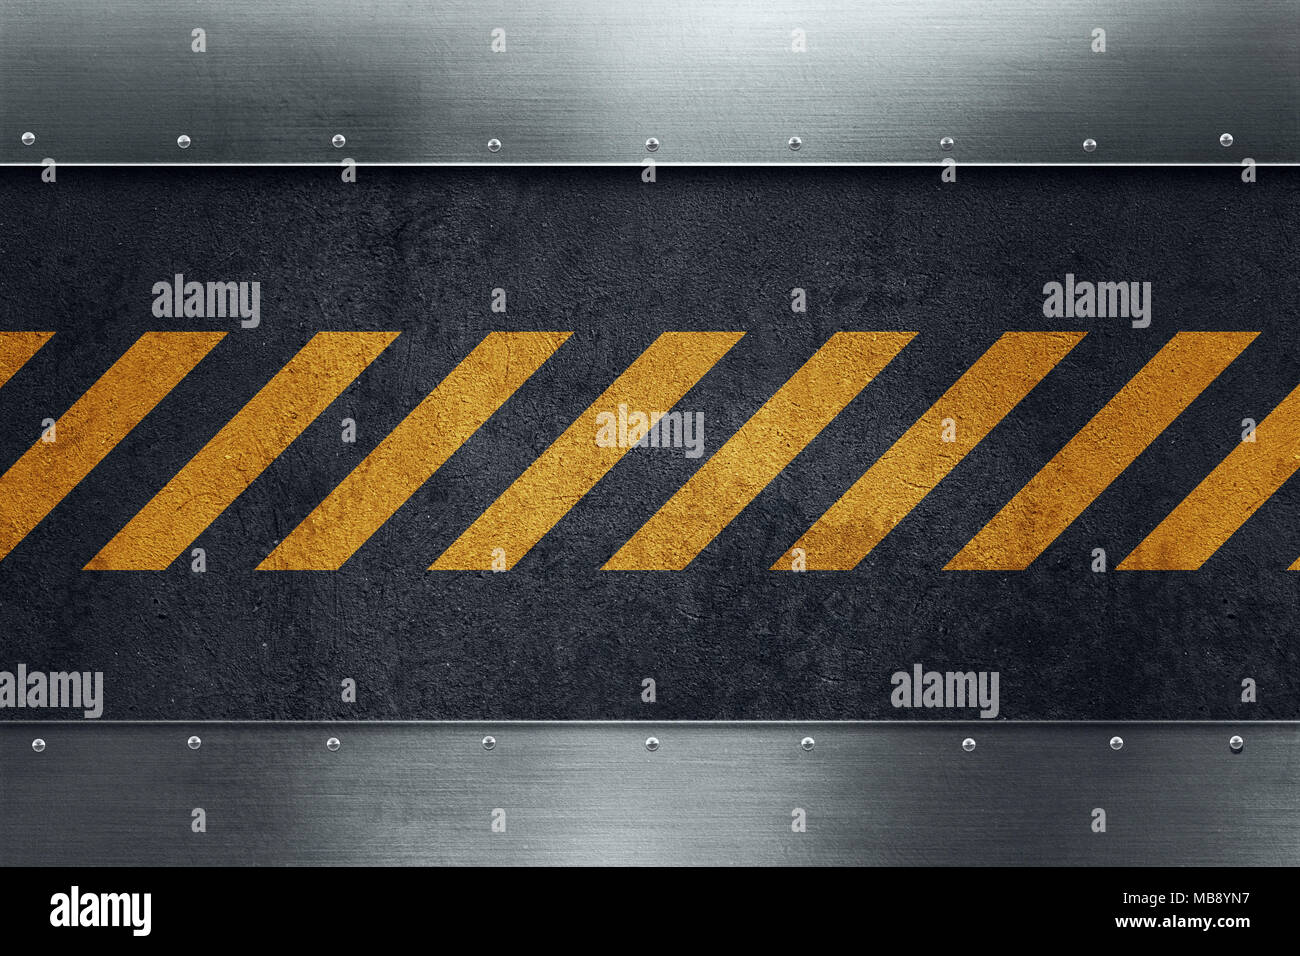 Black dirty grungy asphalt surface with yellow warning stripes. Polished metal plates with rivets. Place for your text. Stock Photo